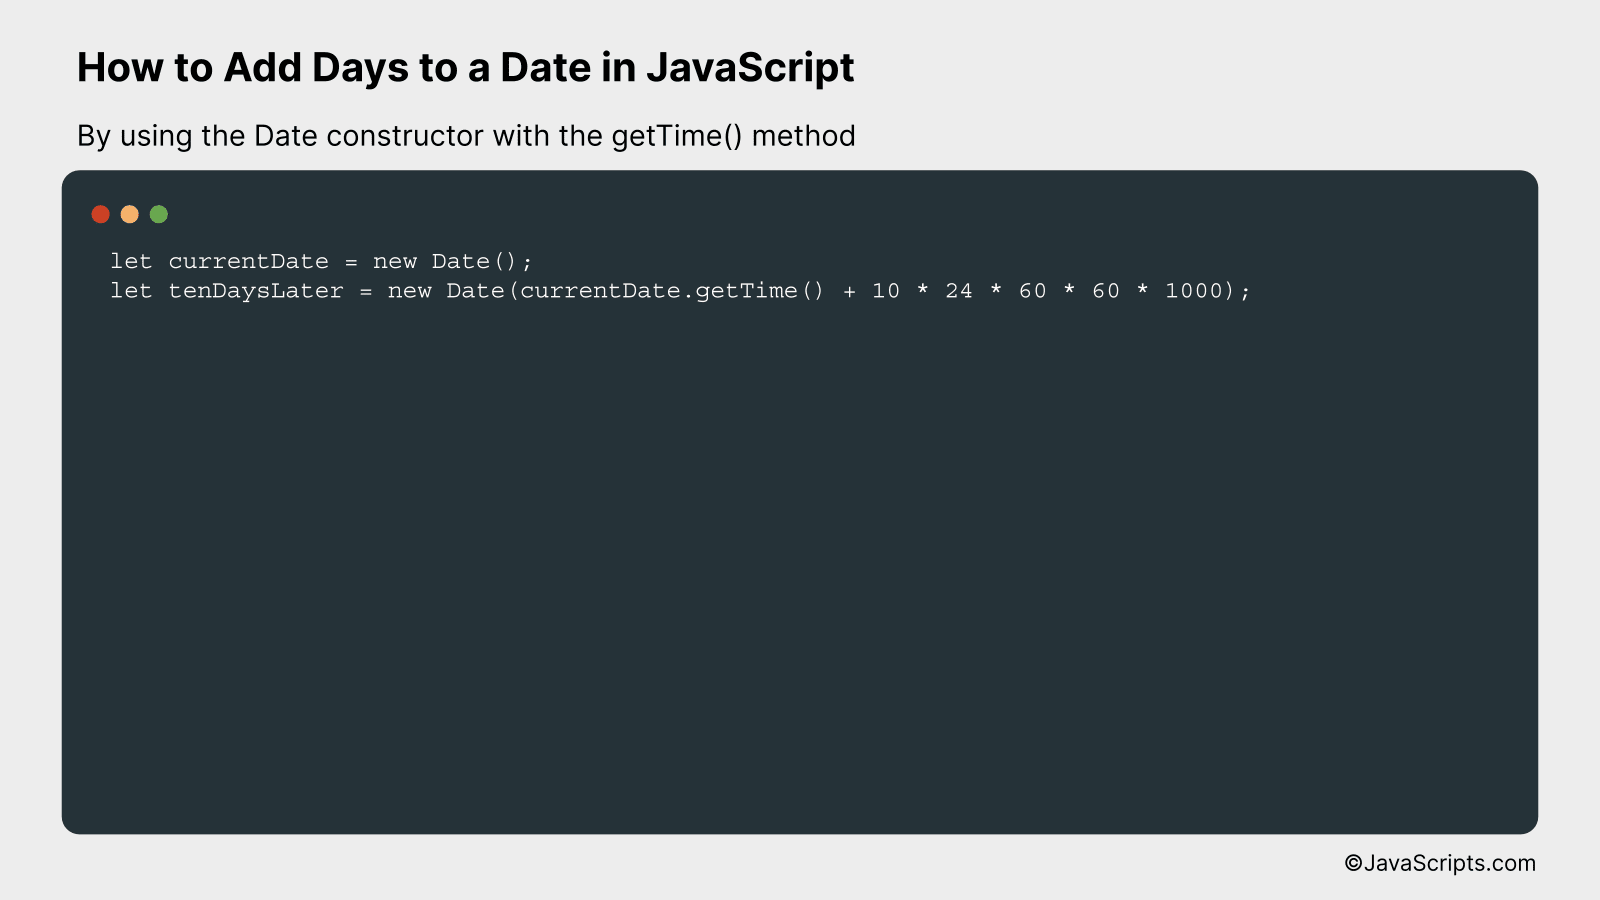 By using the Date constructor with the getTime() method